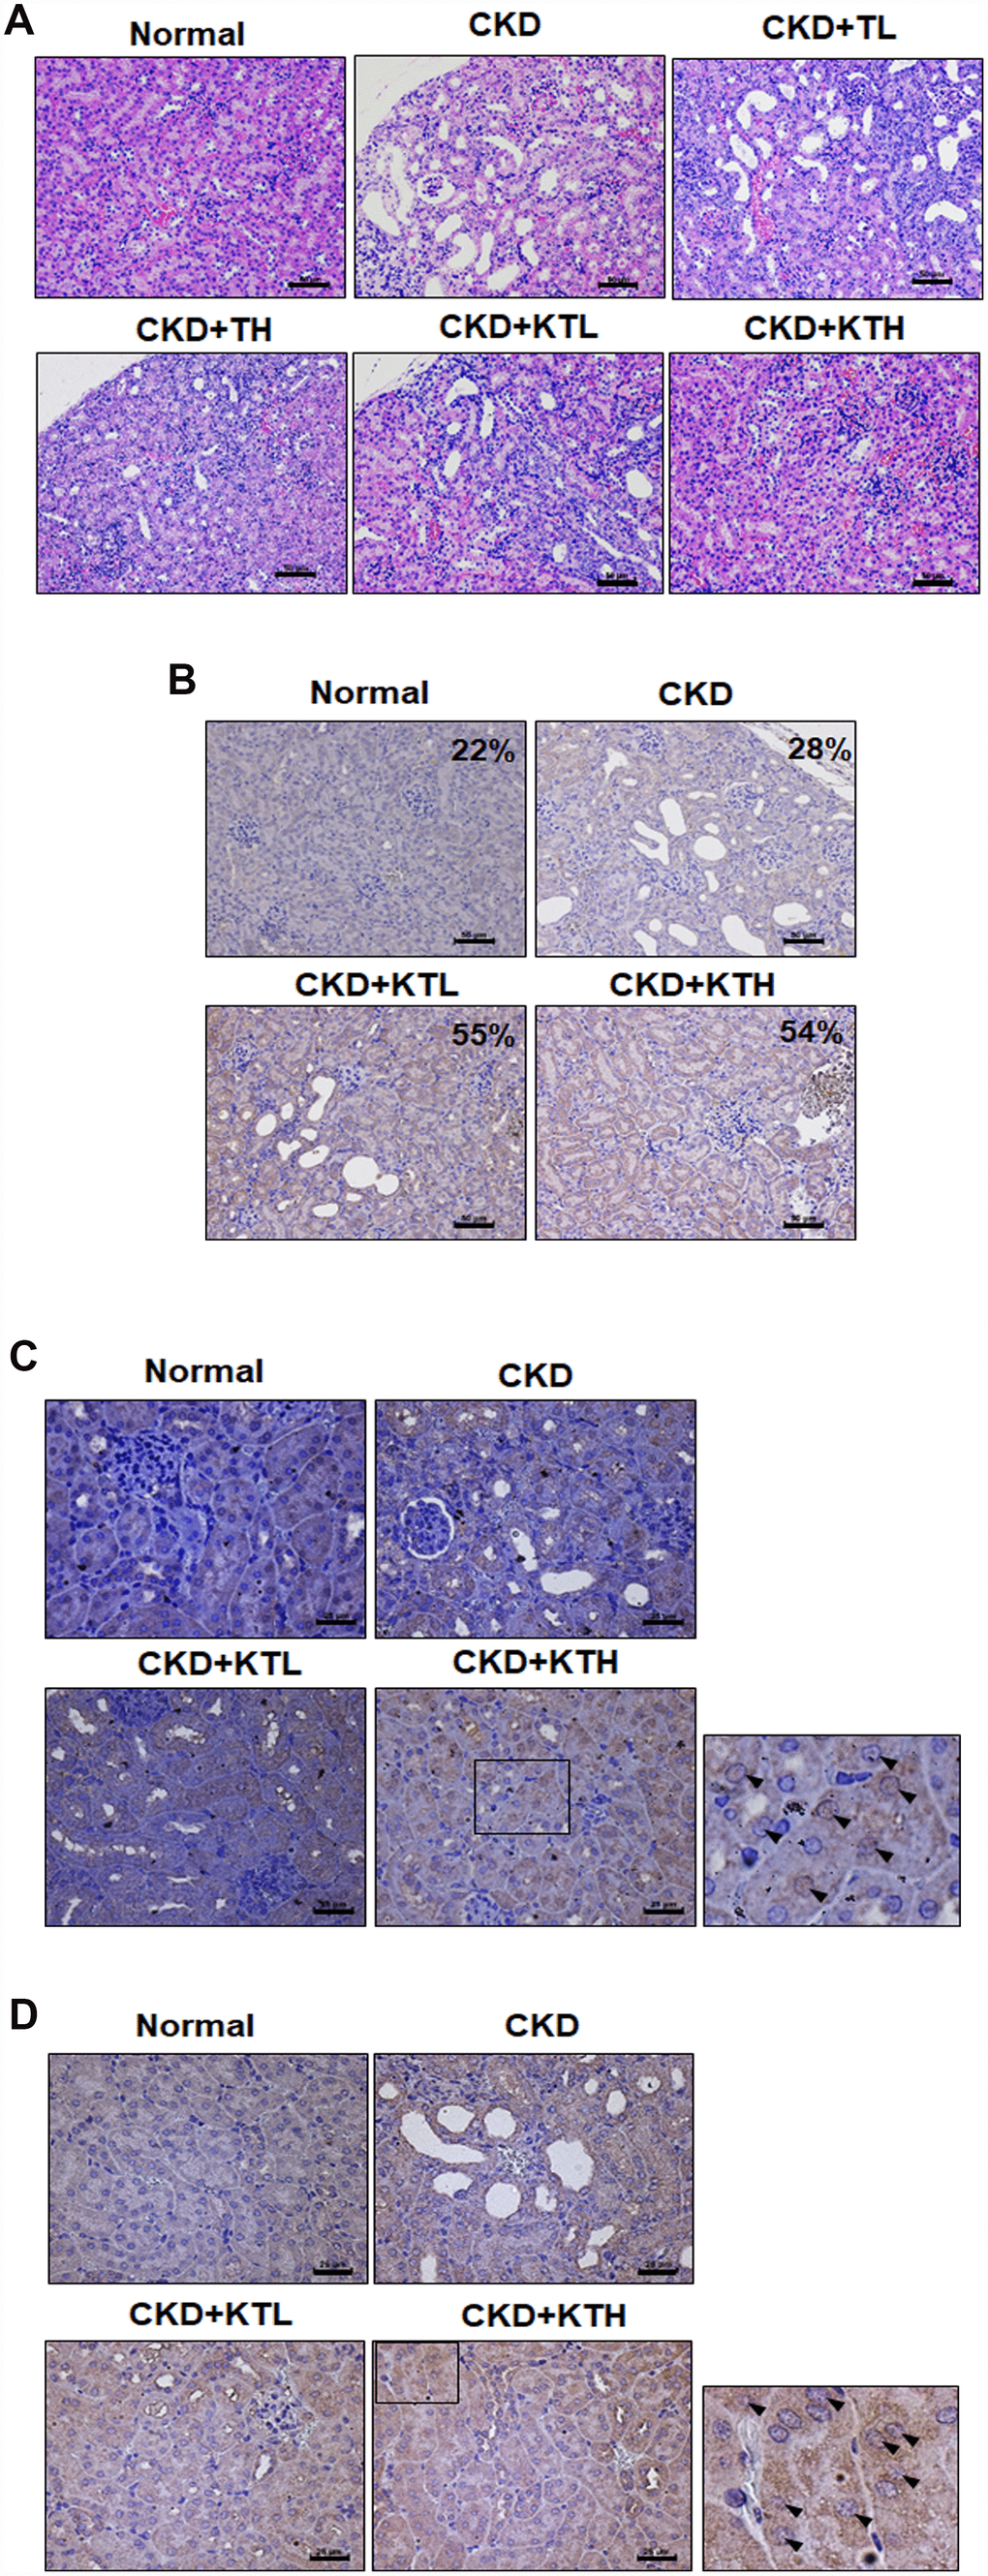 TG NPs and KIM-1-TG NPs protect against tubulointerstitial injury in mice with CKD induced by adenine. (A) Representative photographs of histological changes showing sections of renal tissue from mice after H&E staining. Immunohistochemical analysis of the protein expression of LC3 (B), FoxO1 (C) and Nrf2 (D) in the sections of renal tissue. The percentage of LC3-positive cells was determined using HistoQuest software (TissueGnostics). (A, B) Scale bar = 50 μm. (C, D) Scale bar = 25 μm.